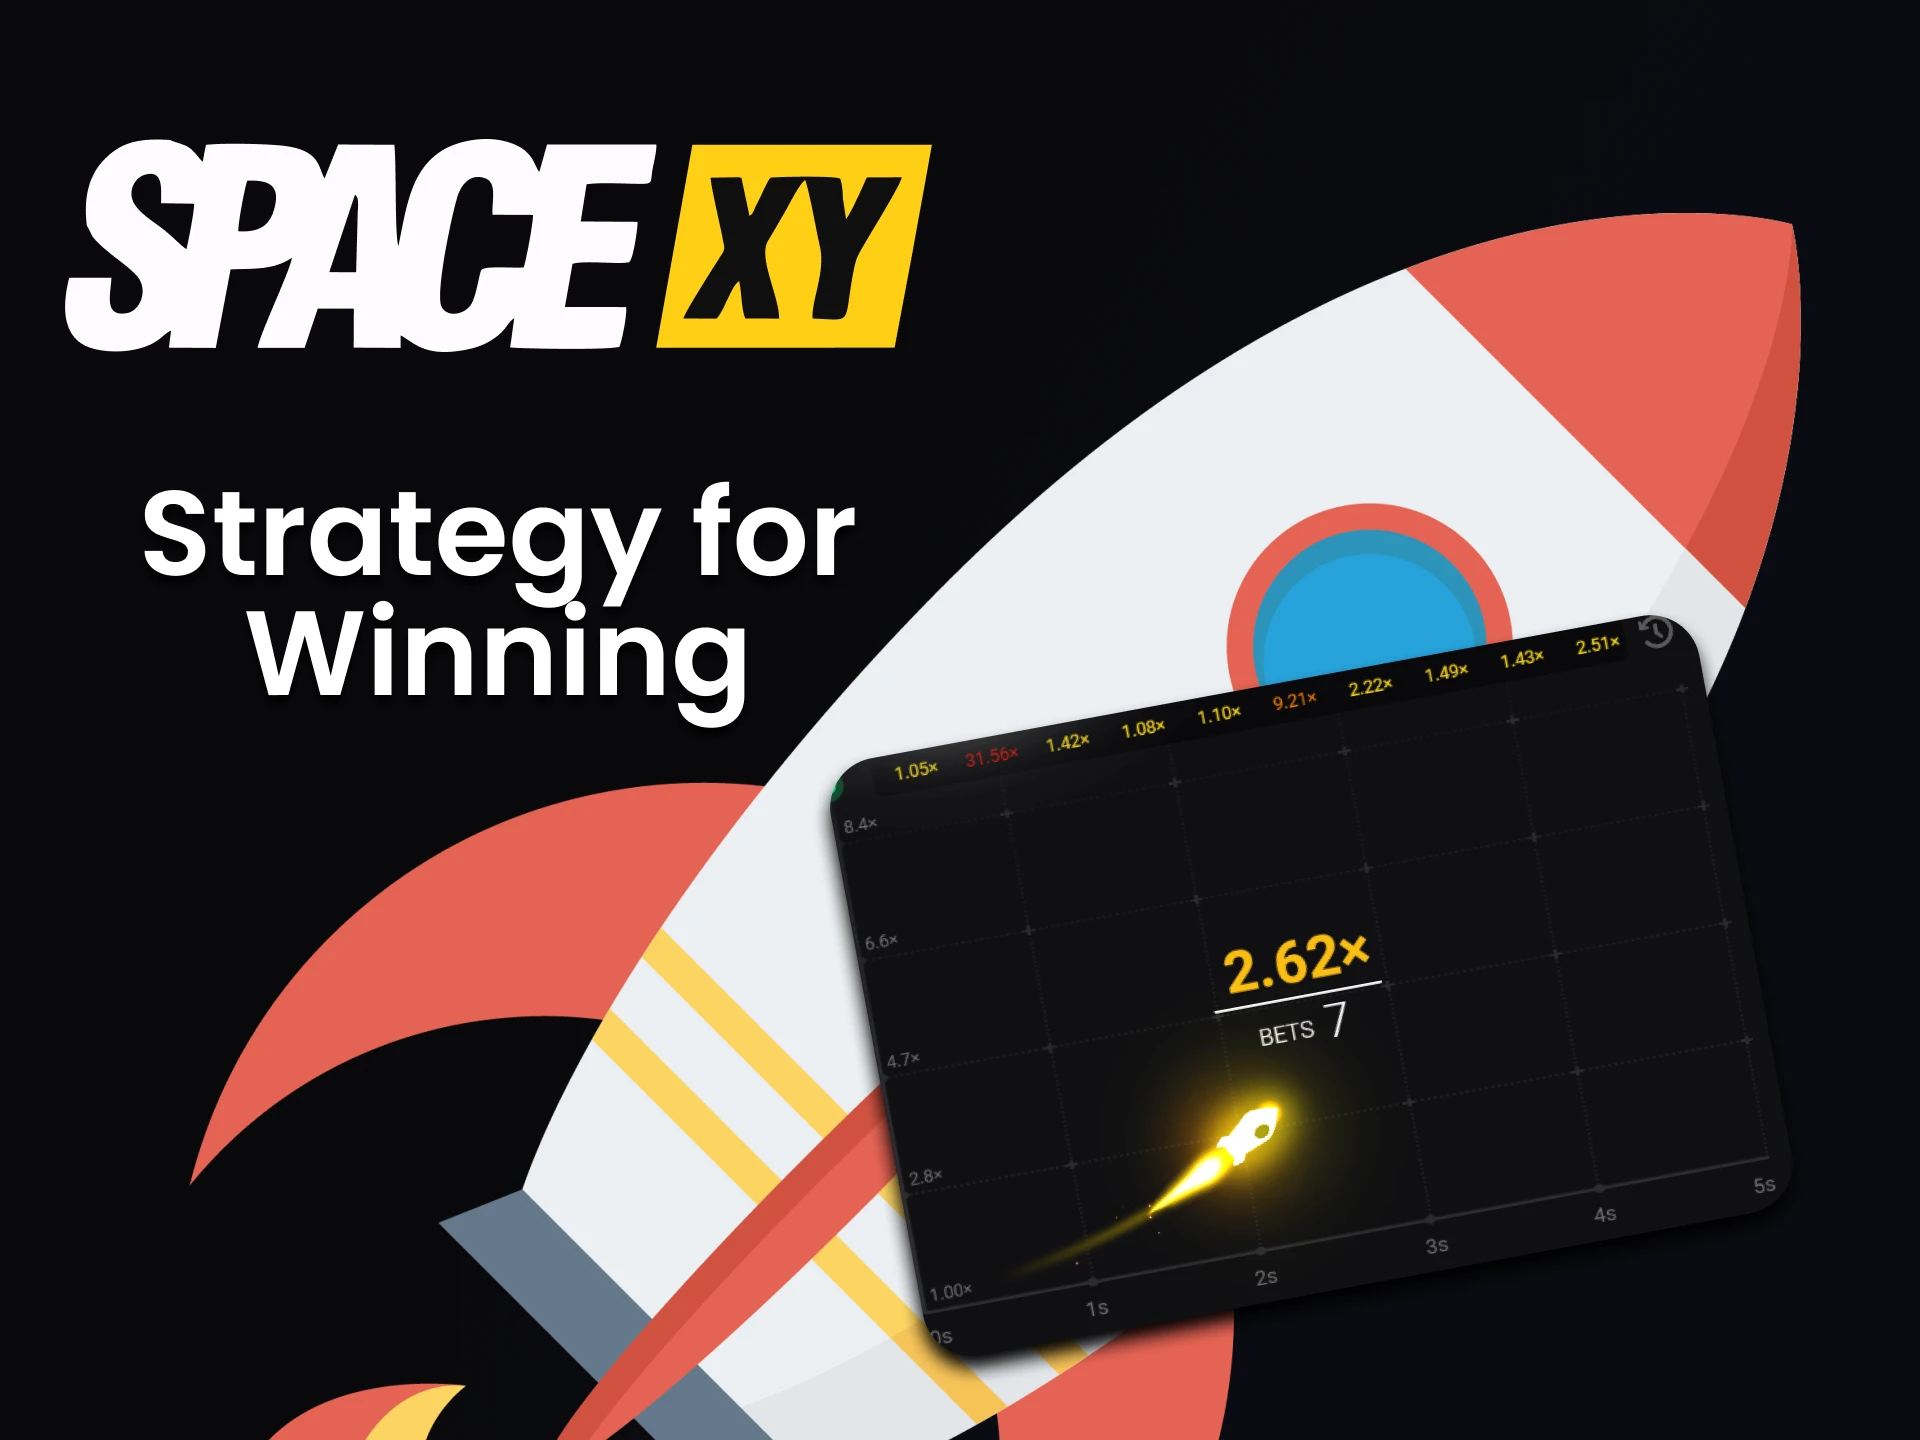 Choose the best strategy for playing Space XY.